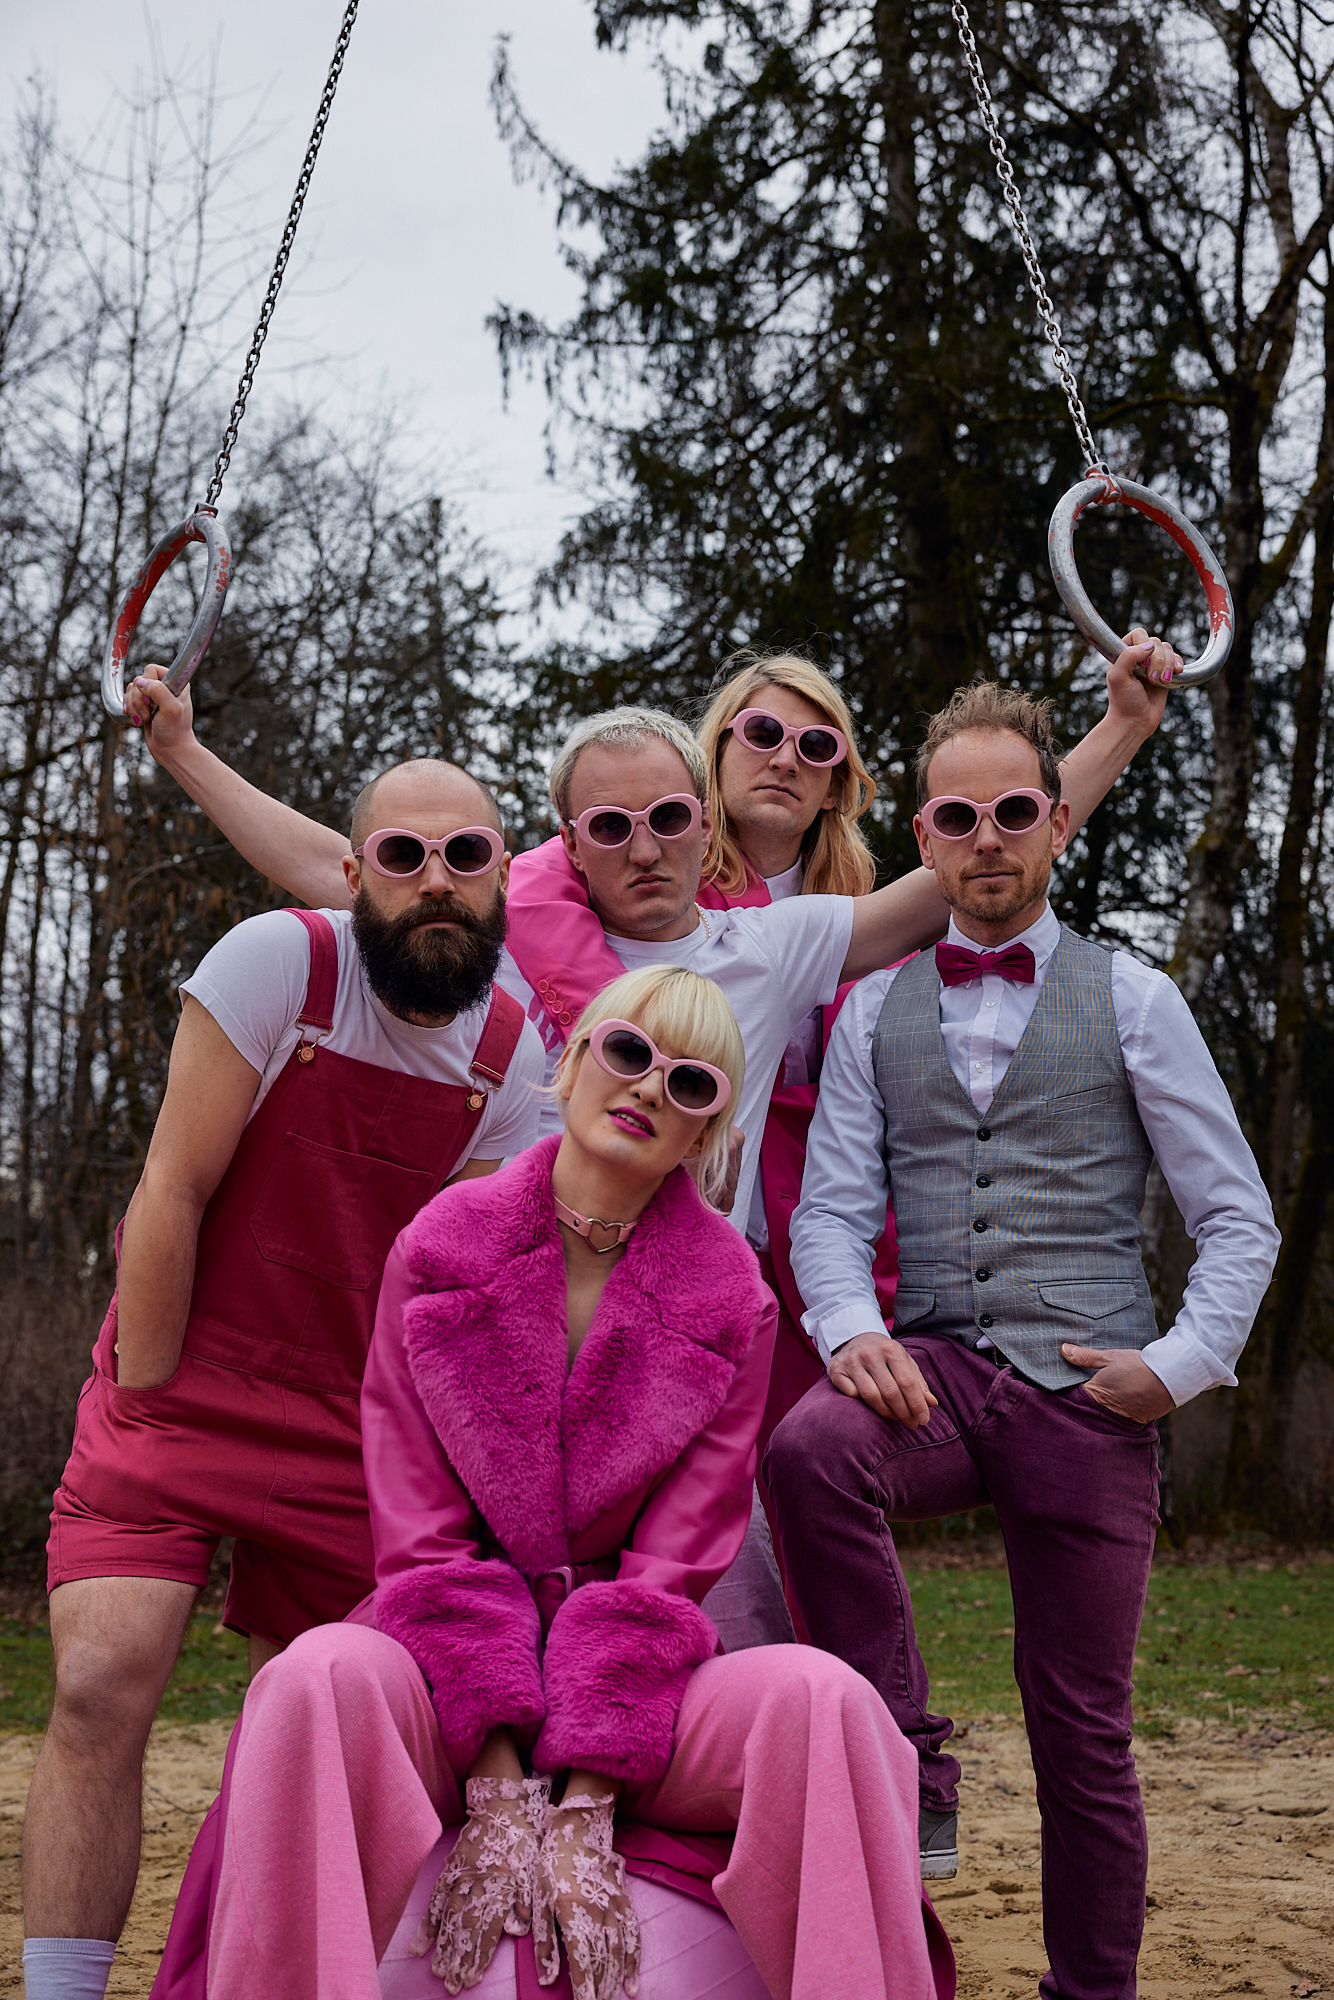 Four men and a woman on a playground in nature. They wear pink sunglasses.